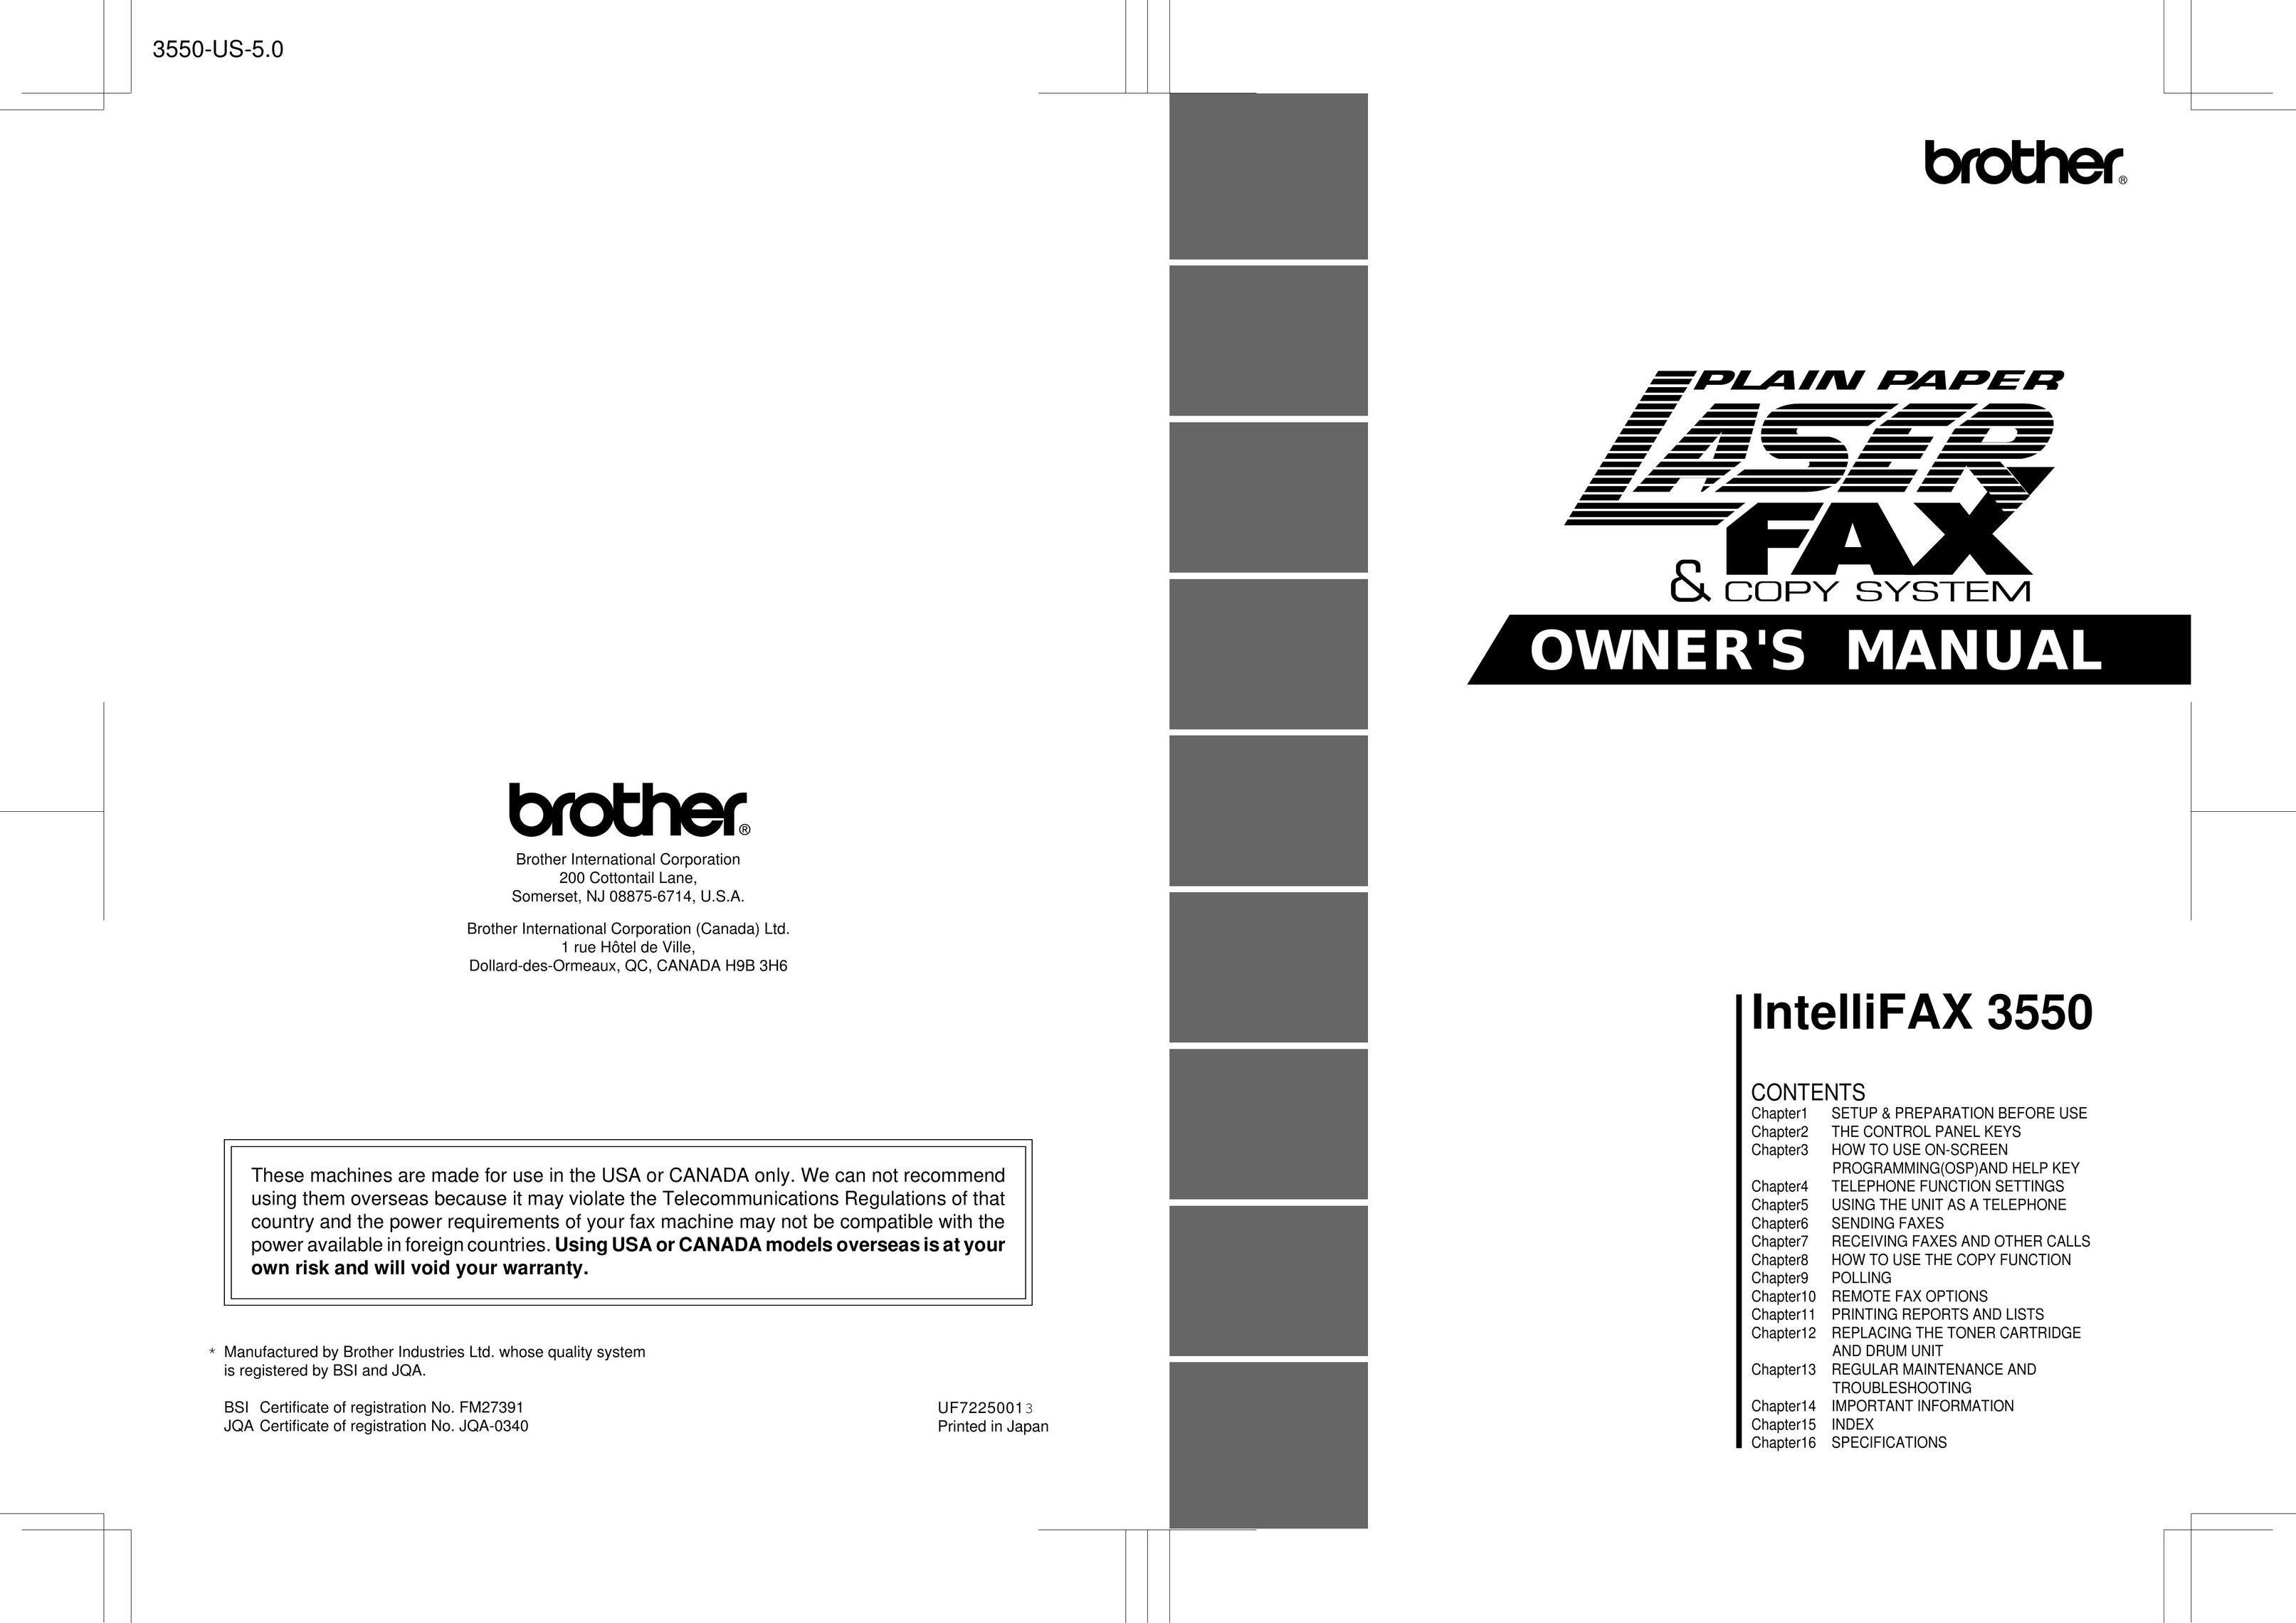 Brother 3550 Fax Machine User Manual